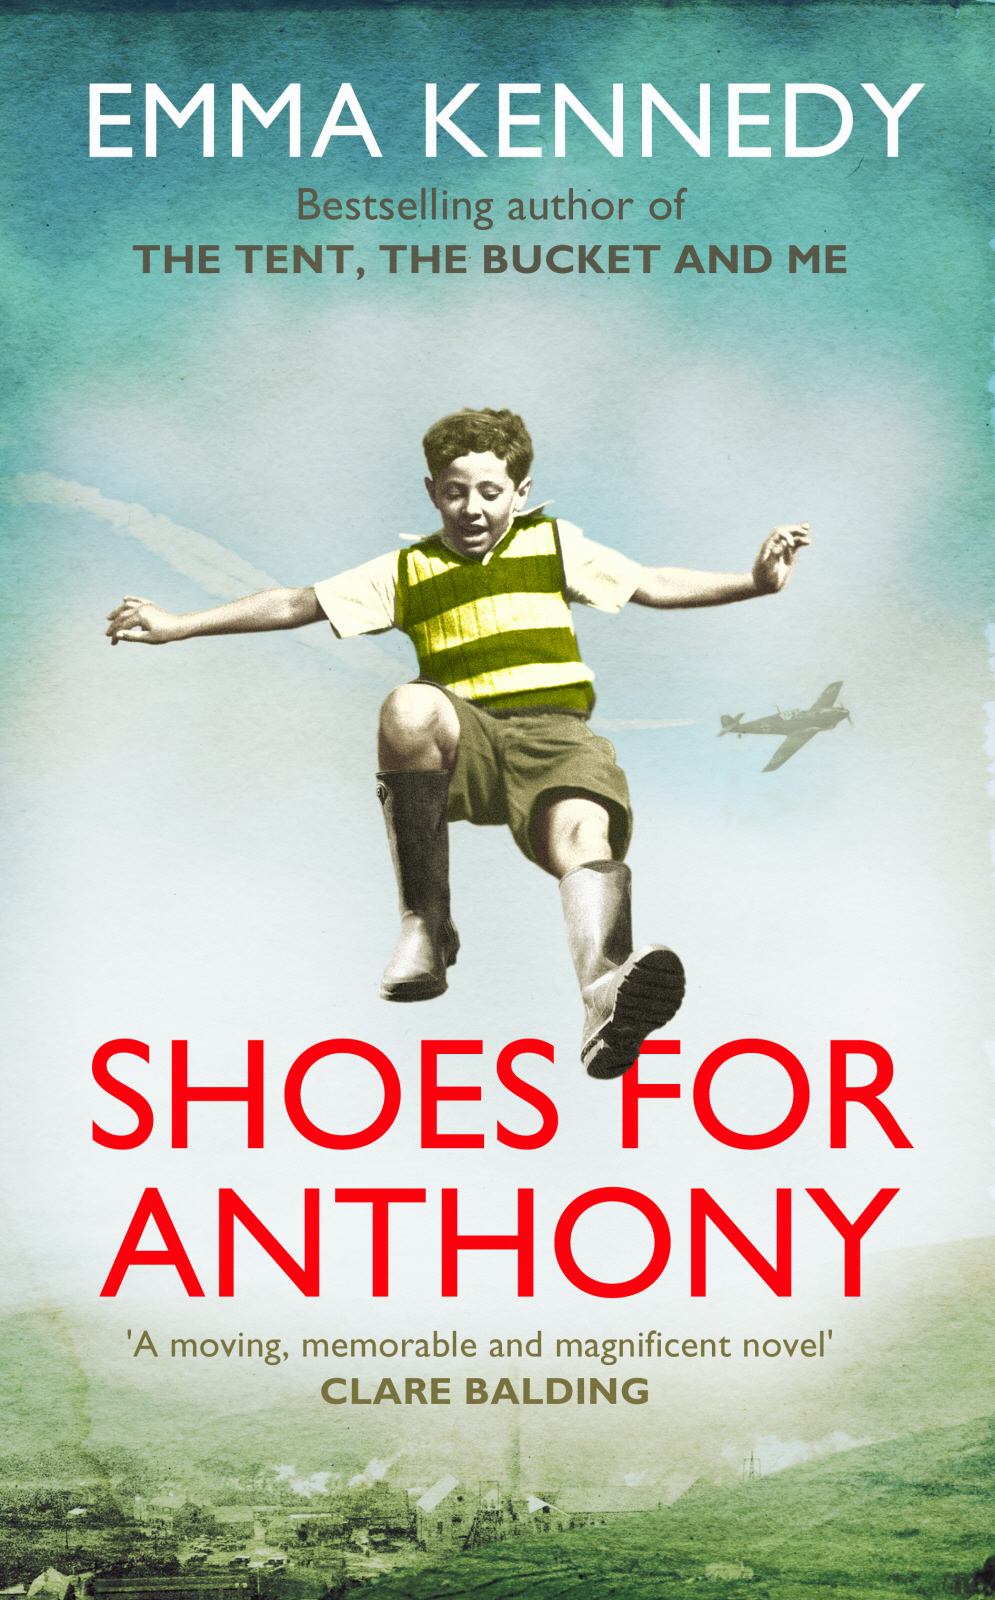 Shoes for Anthony by Emma Kennedy